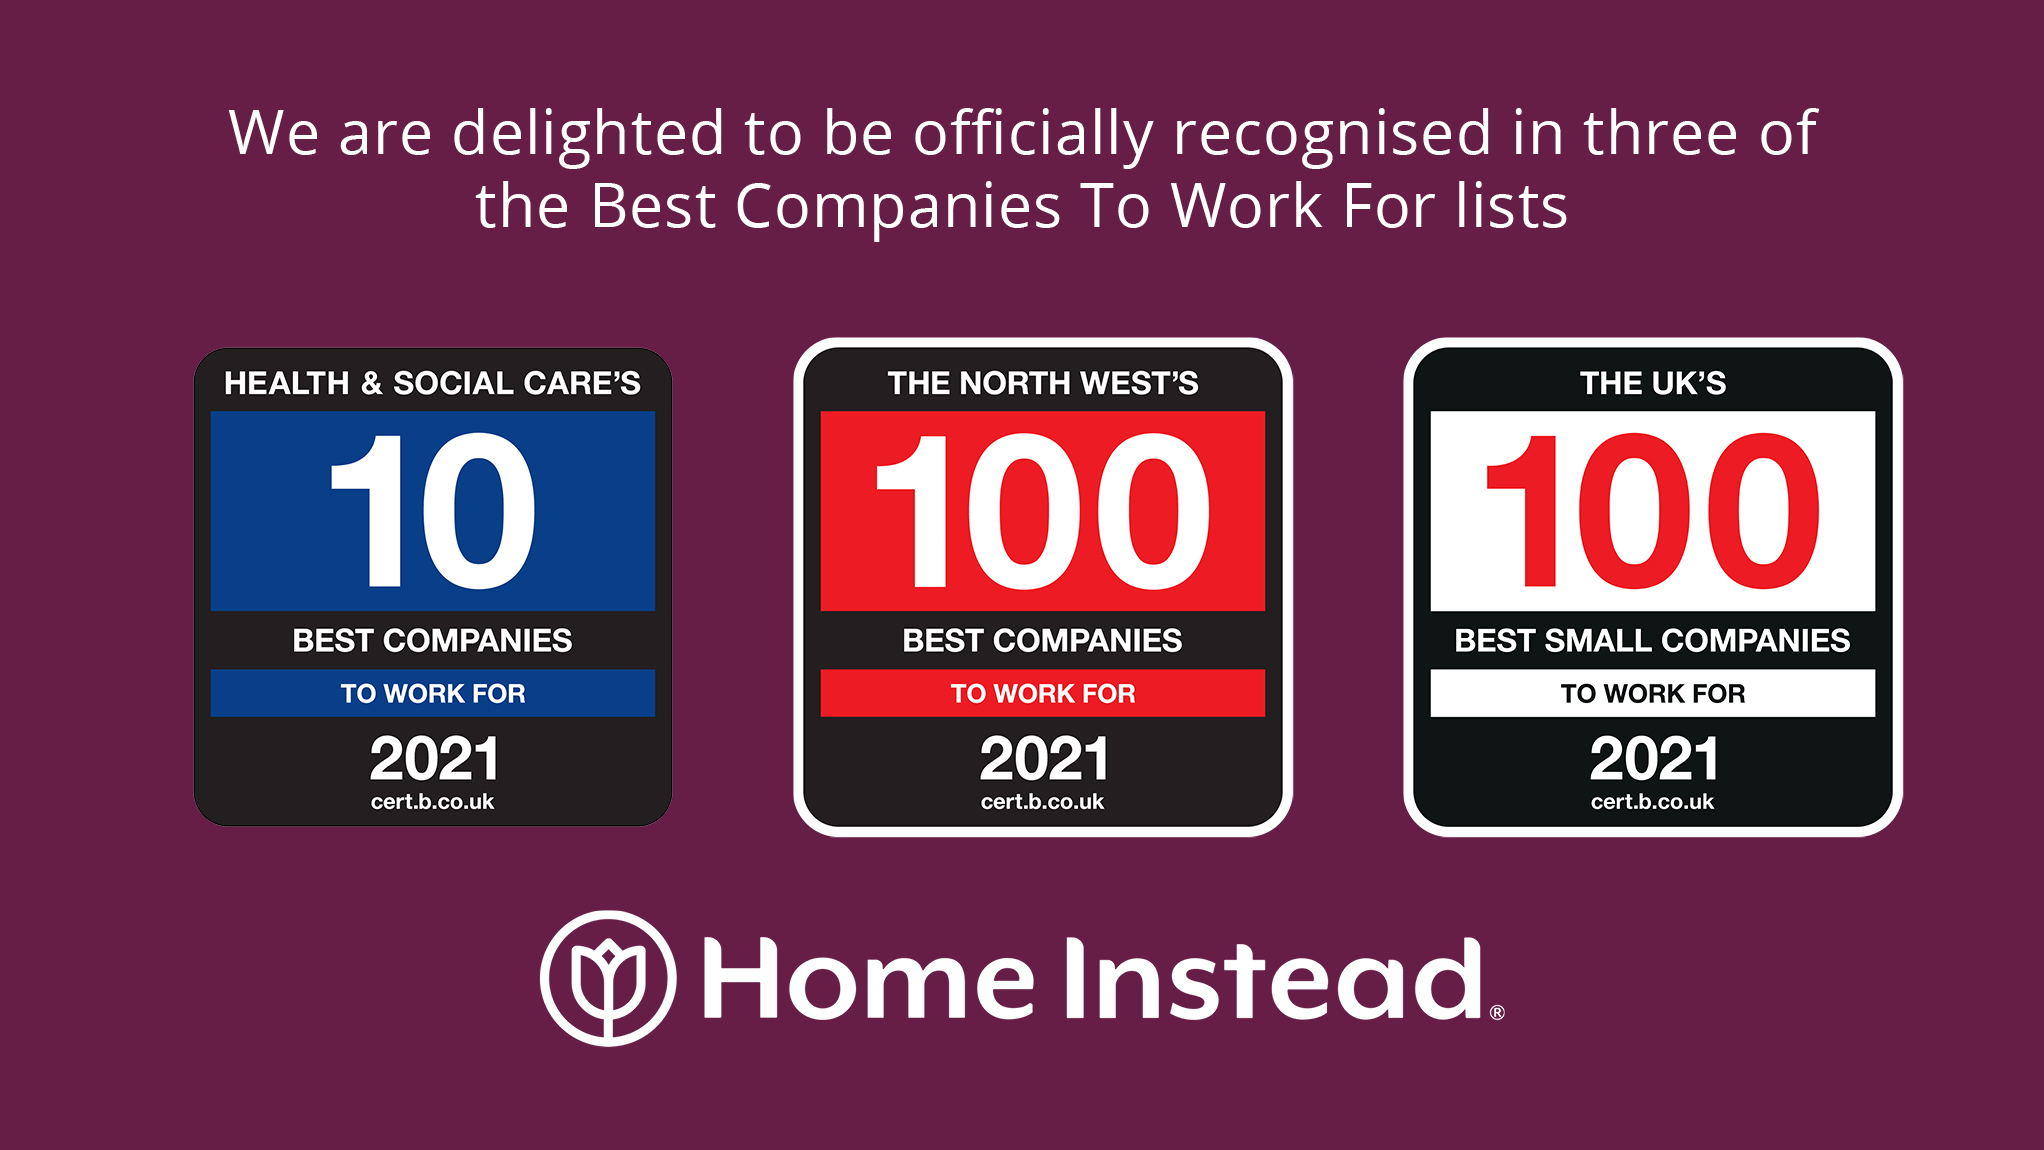 Home Instead awarded with Best company trio